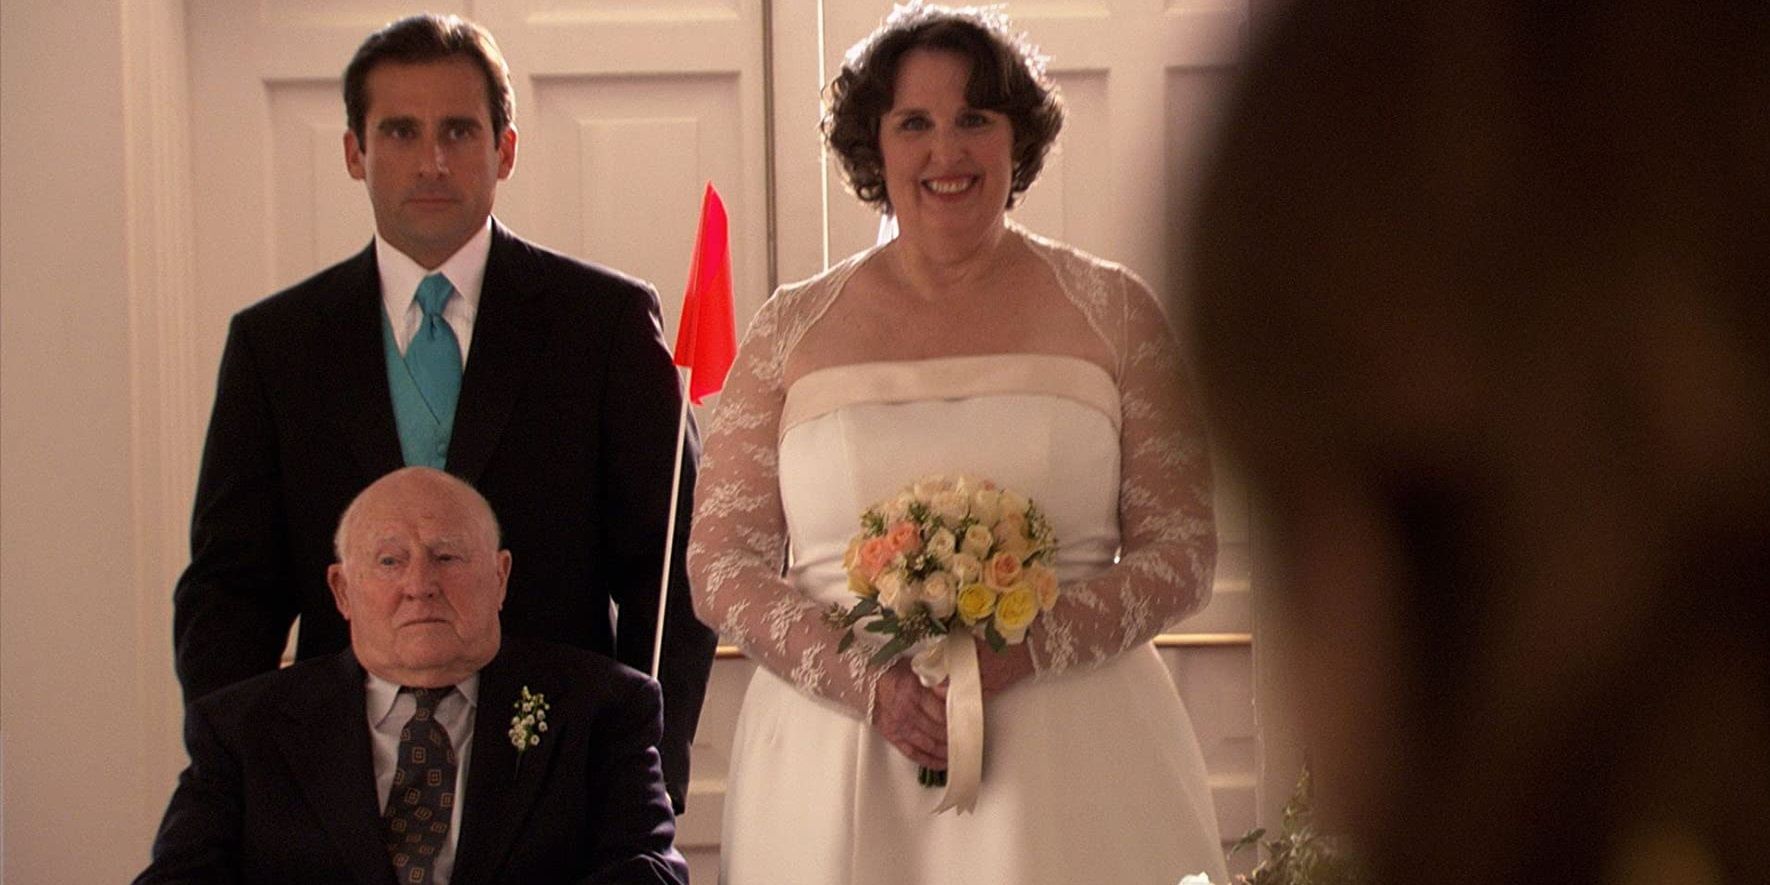 Michael pushes Albert down the aisle with Phyllis in The Office